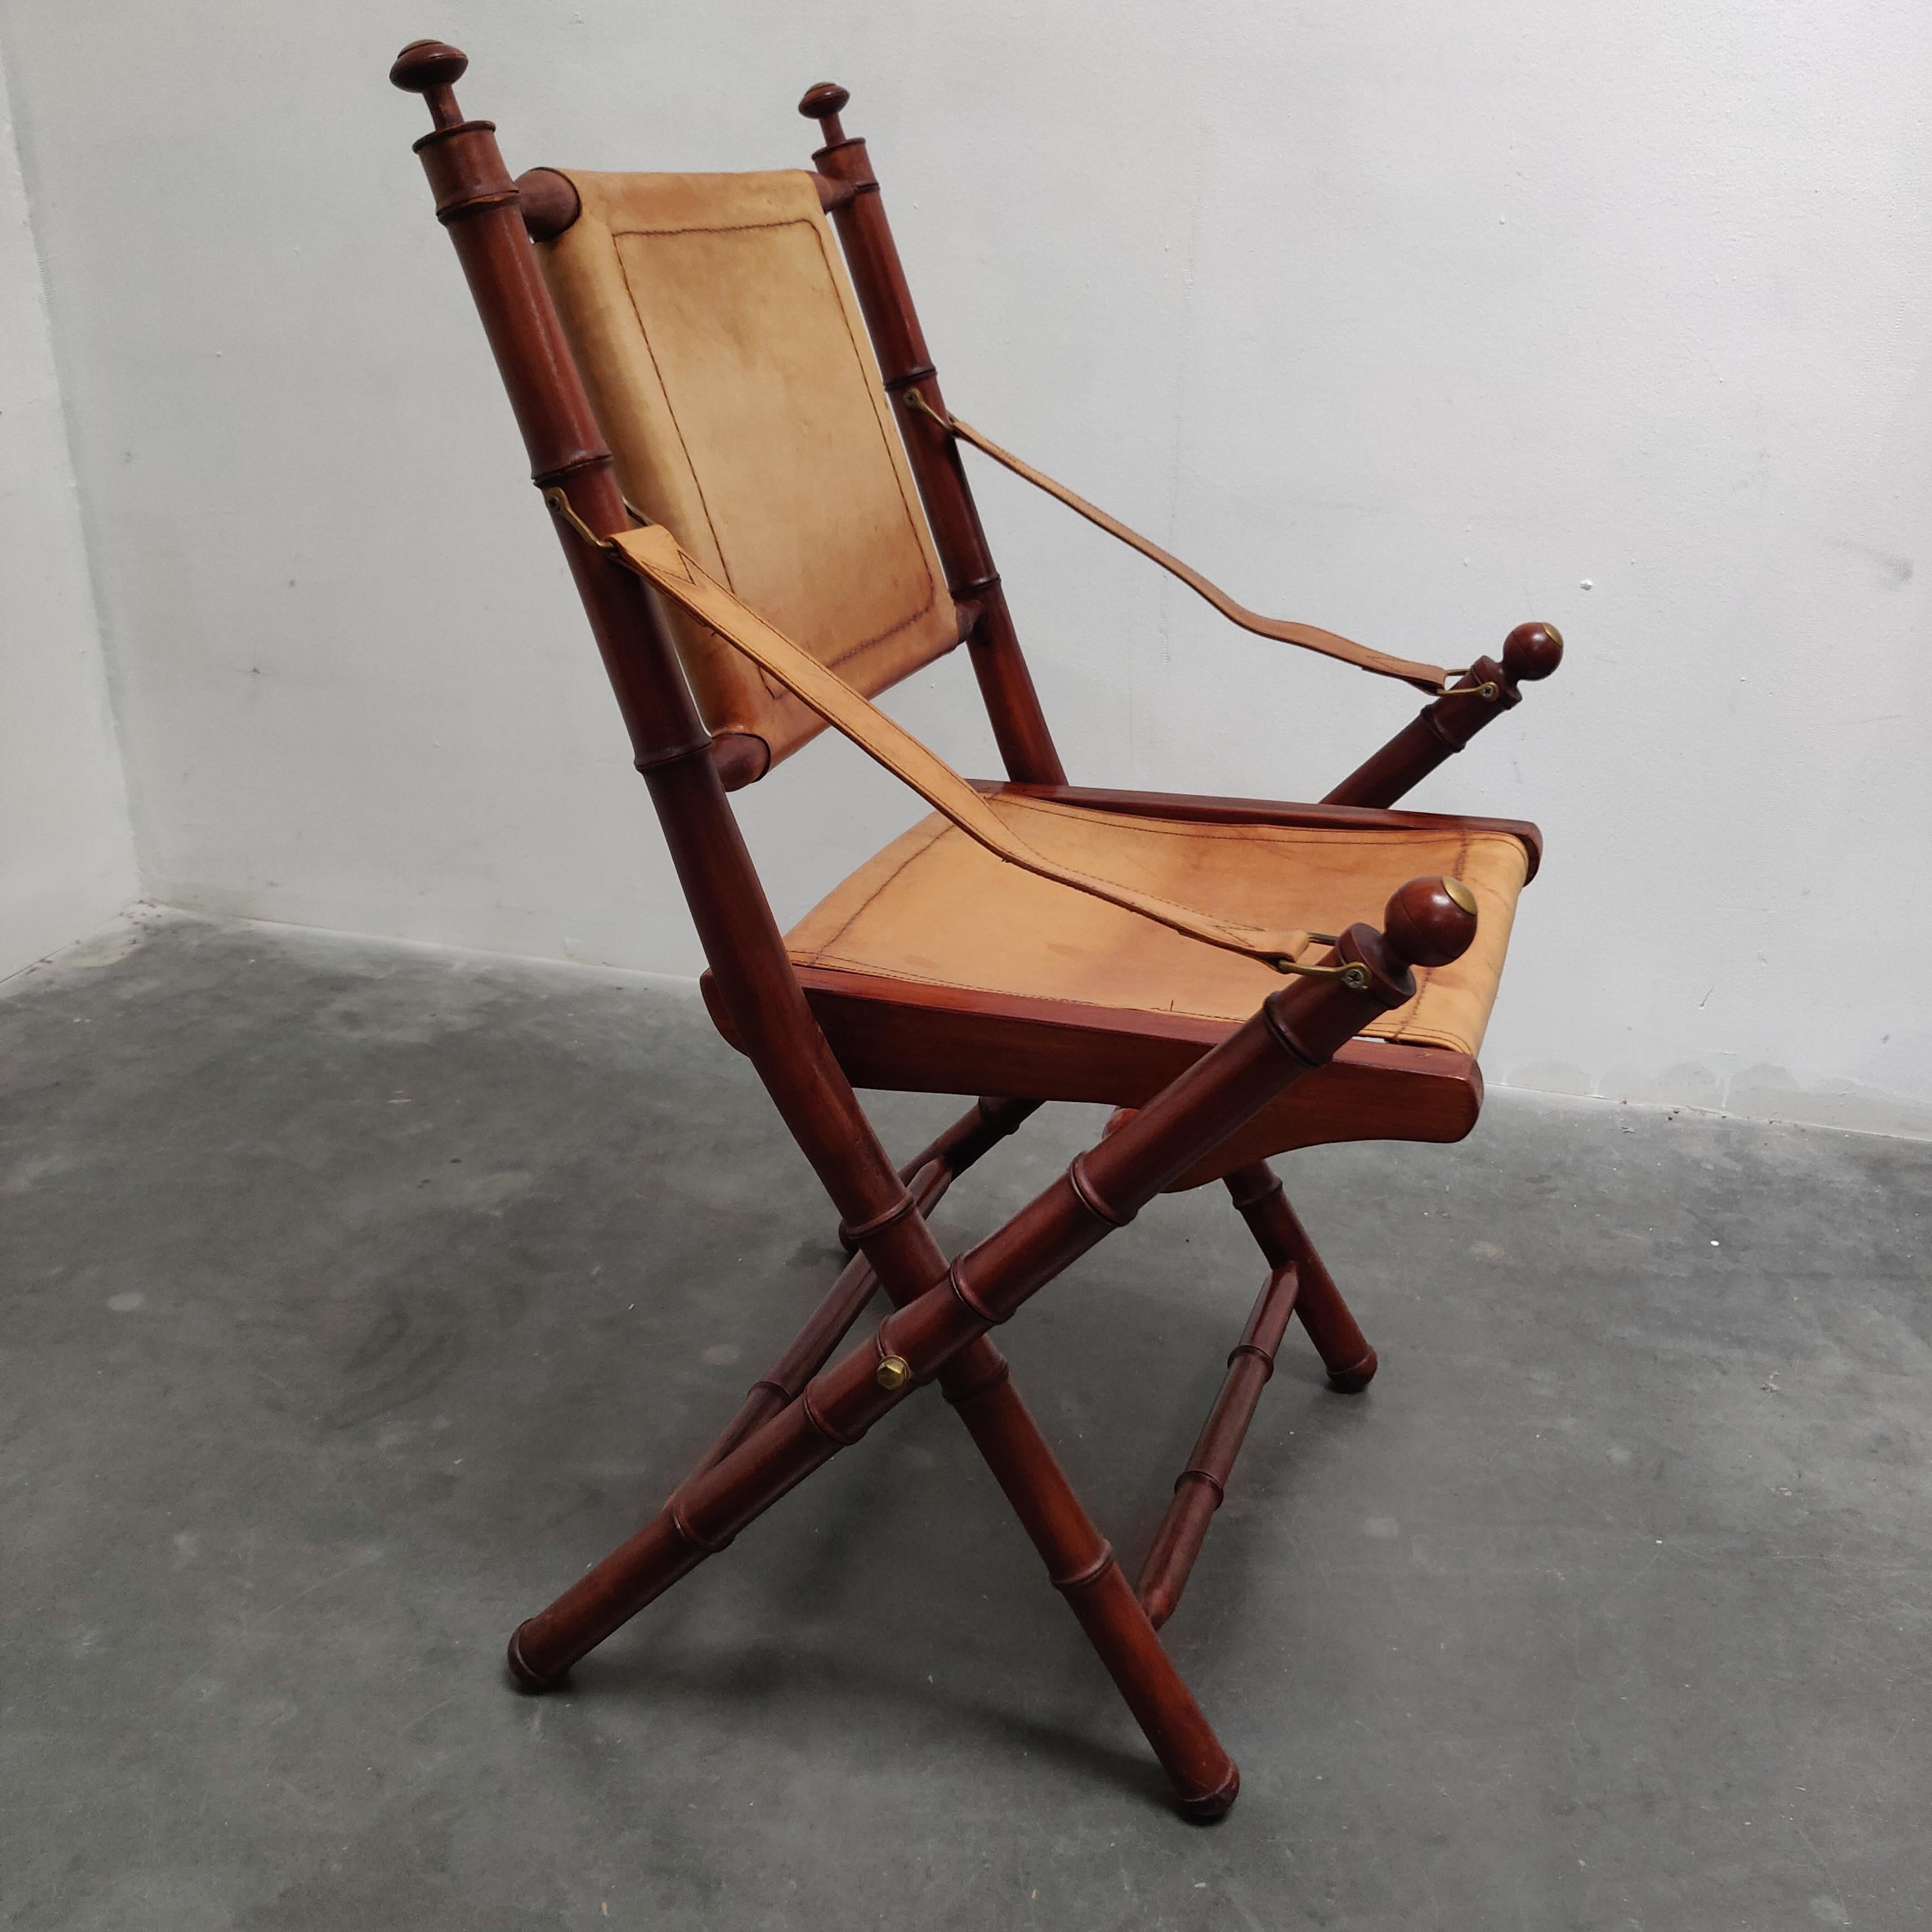 Mid century Faux Bamboo and leather British colonial officers folding chair.
Expertly crafted Faux Bamboo, brass hardware and stitched leather back, seat and arm straps.

AA#210461